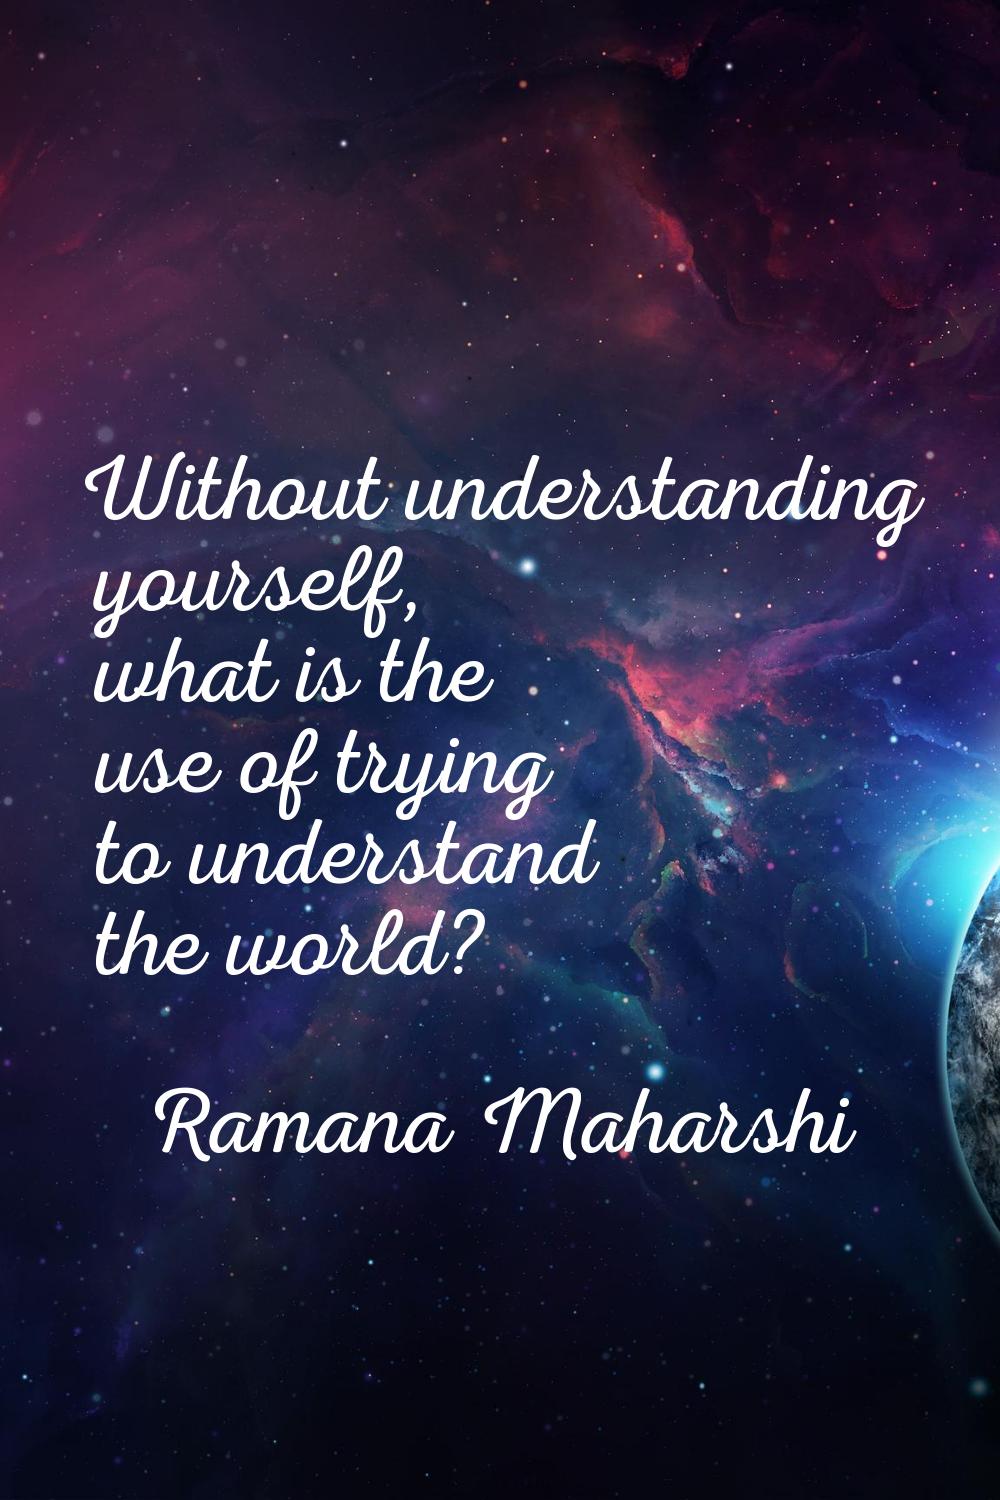 Without understanding yourself, what is the use of trying to understand the world?